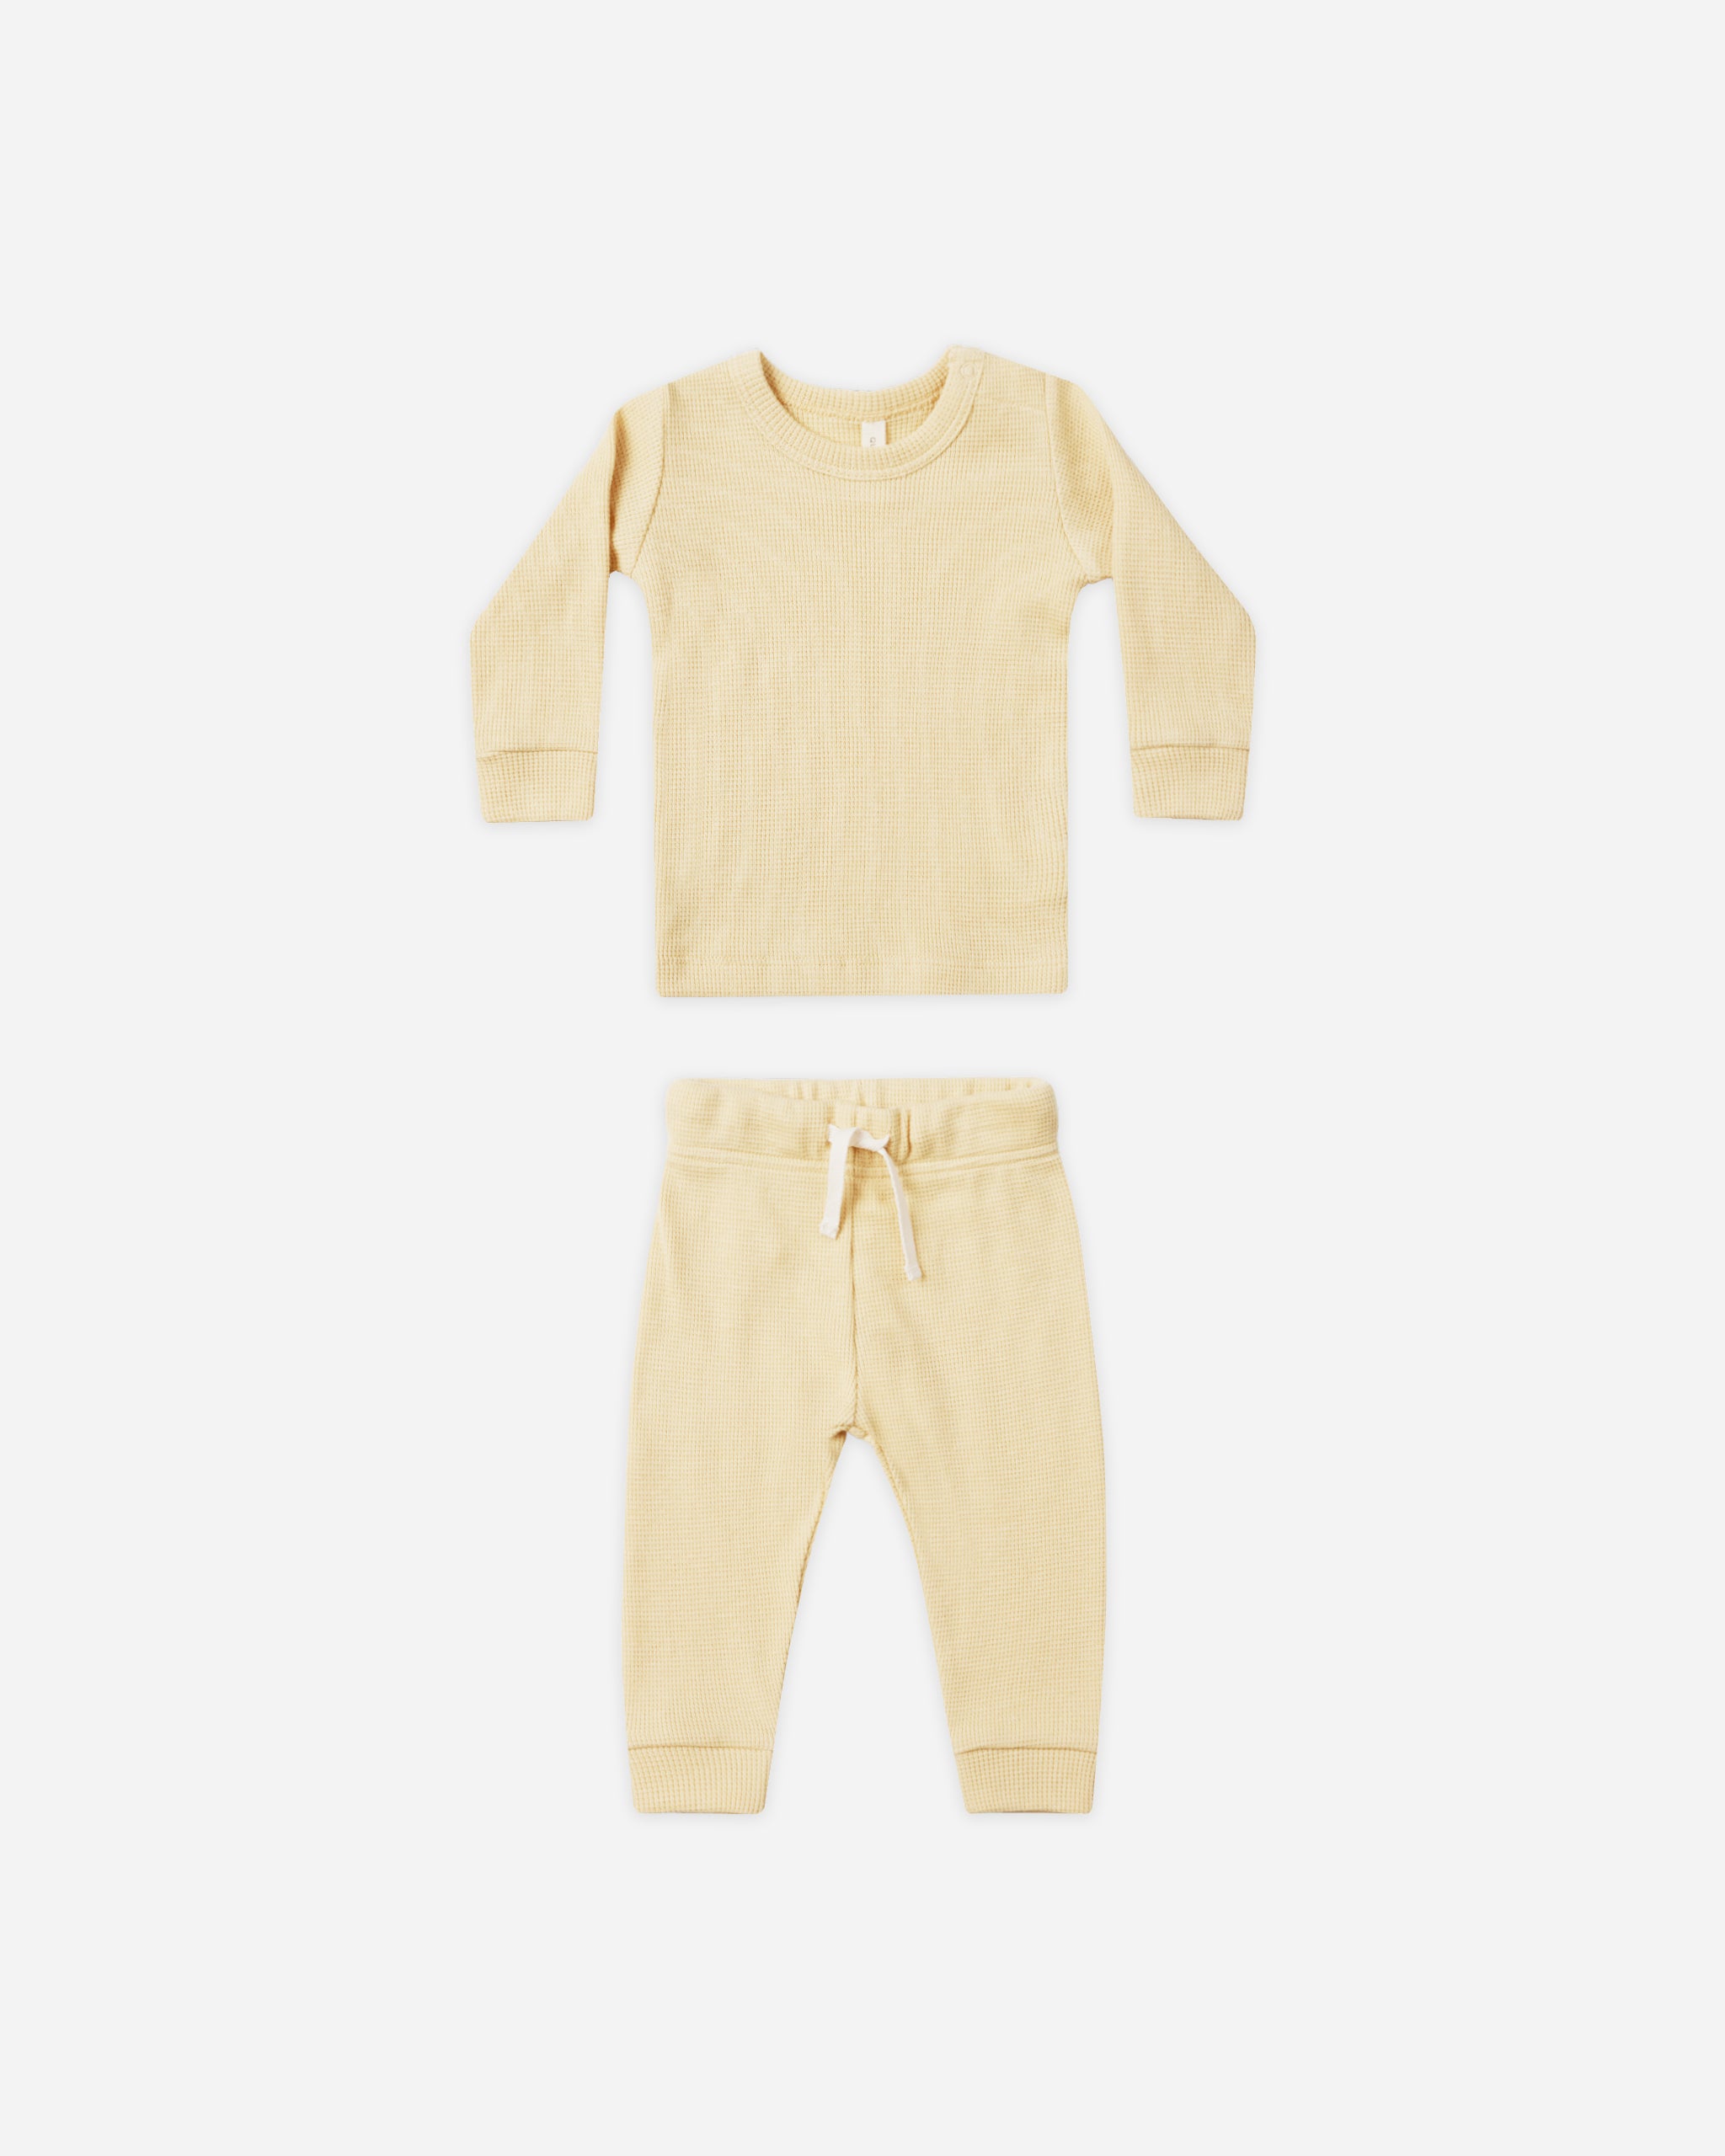 Waffle Top + Pant Set || Lemon - Rylee + Cru | Kids Clothes | Trendy Baby Clothes | Modern Infant Outfits |